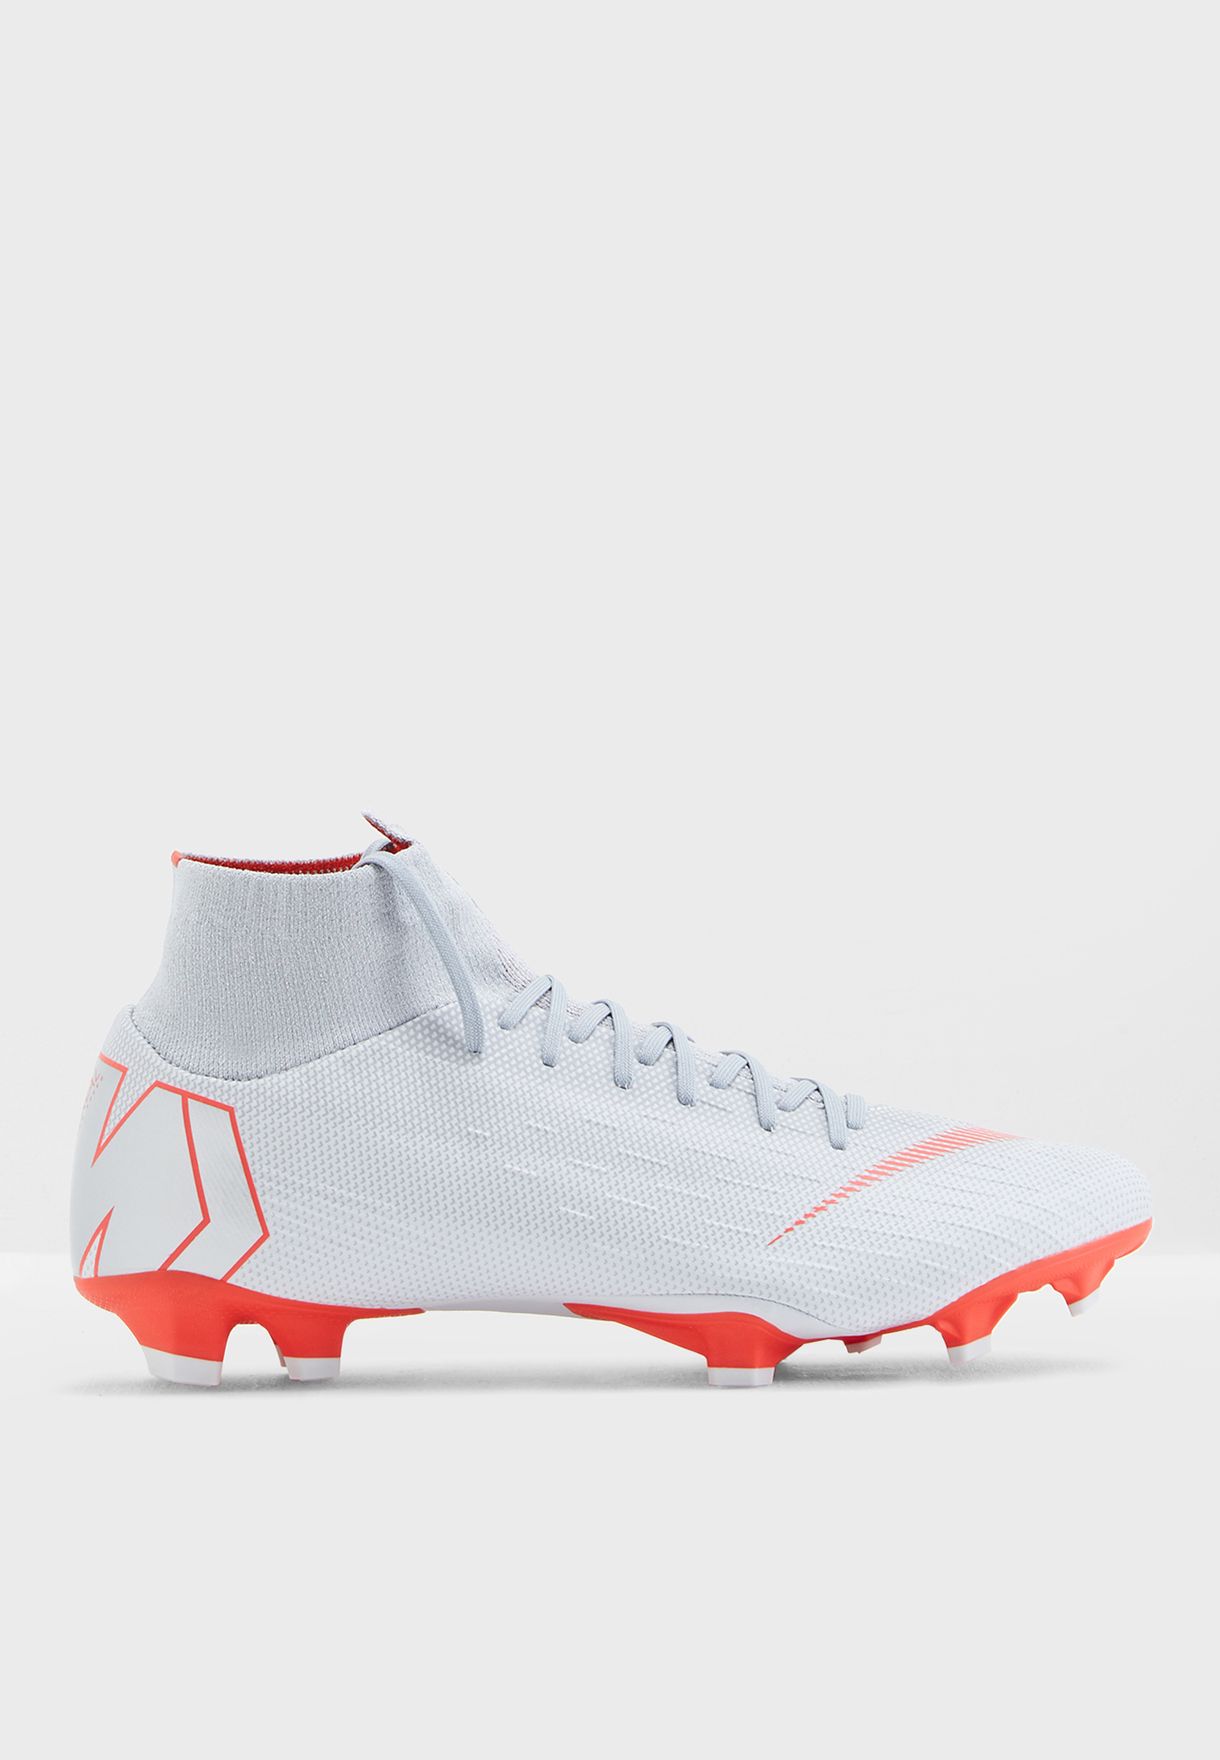 Nike Mercurial Superfly VI Pro CR7 AG PRO Mens Boots.